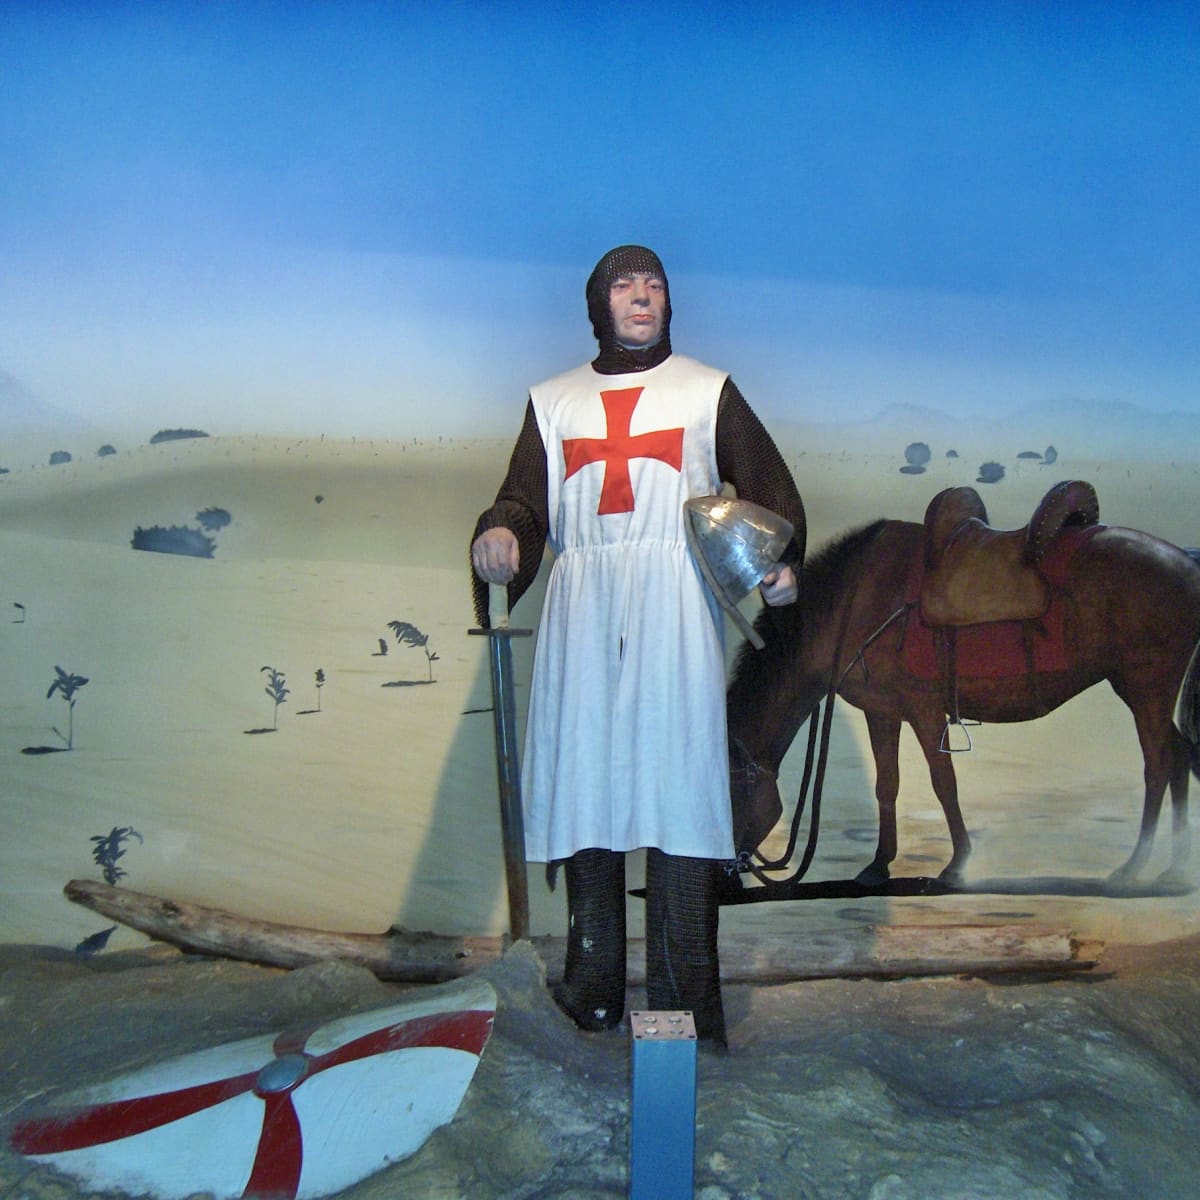 Why did King Philip of France crush the Templars? - The Templar Knight